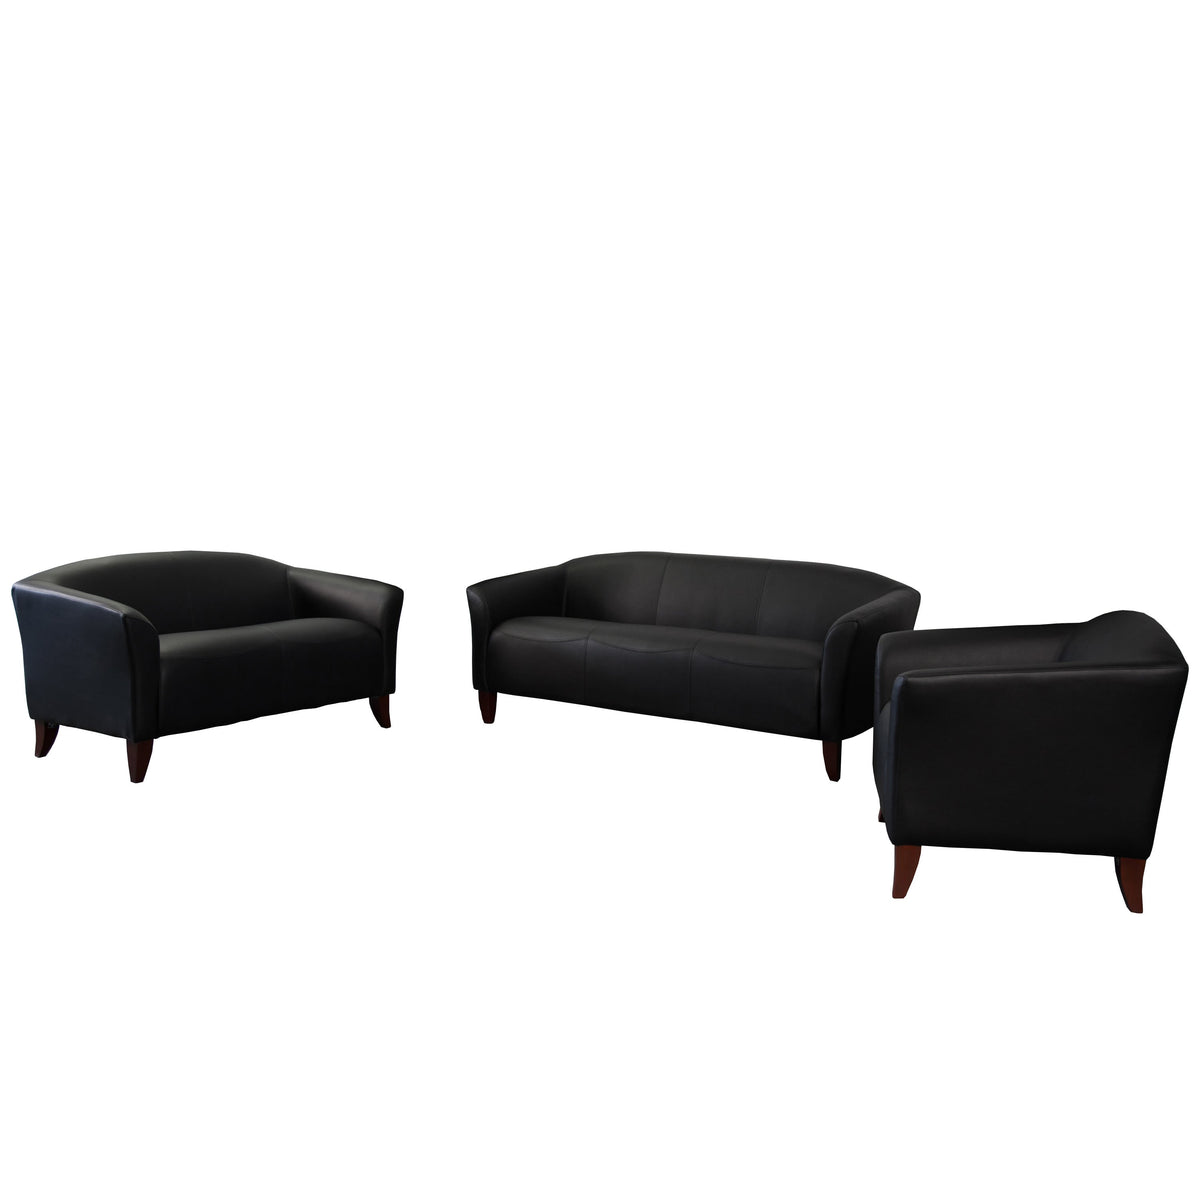 Black |#| Reception Set in Black with Cherry Wood Feet - Hospitality and Lounge Furniture